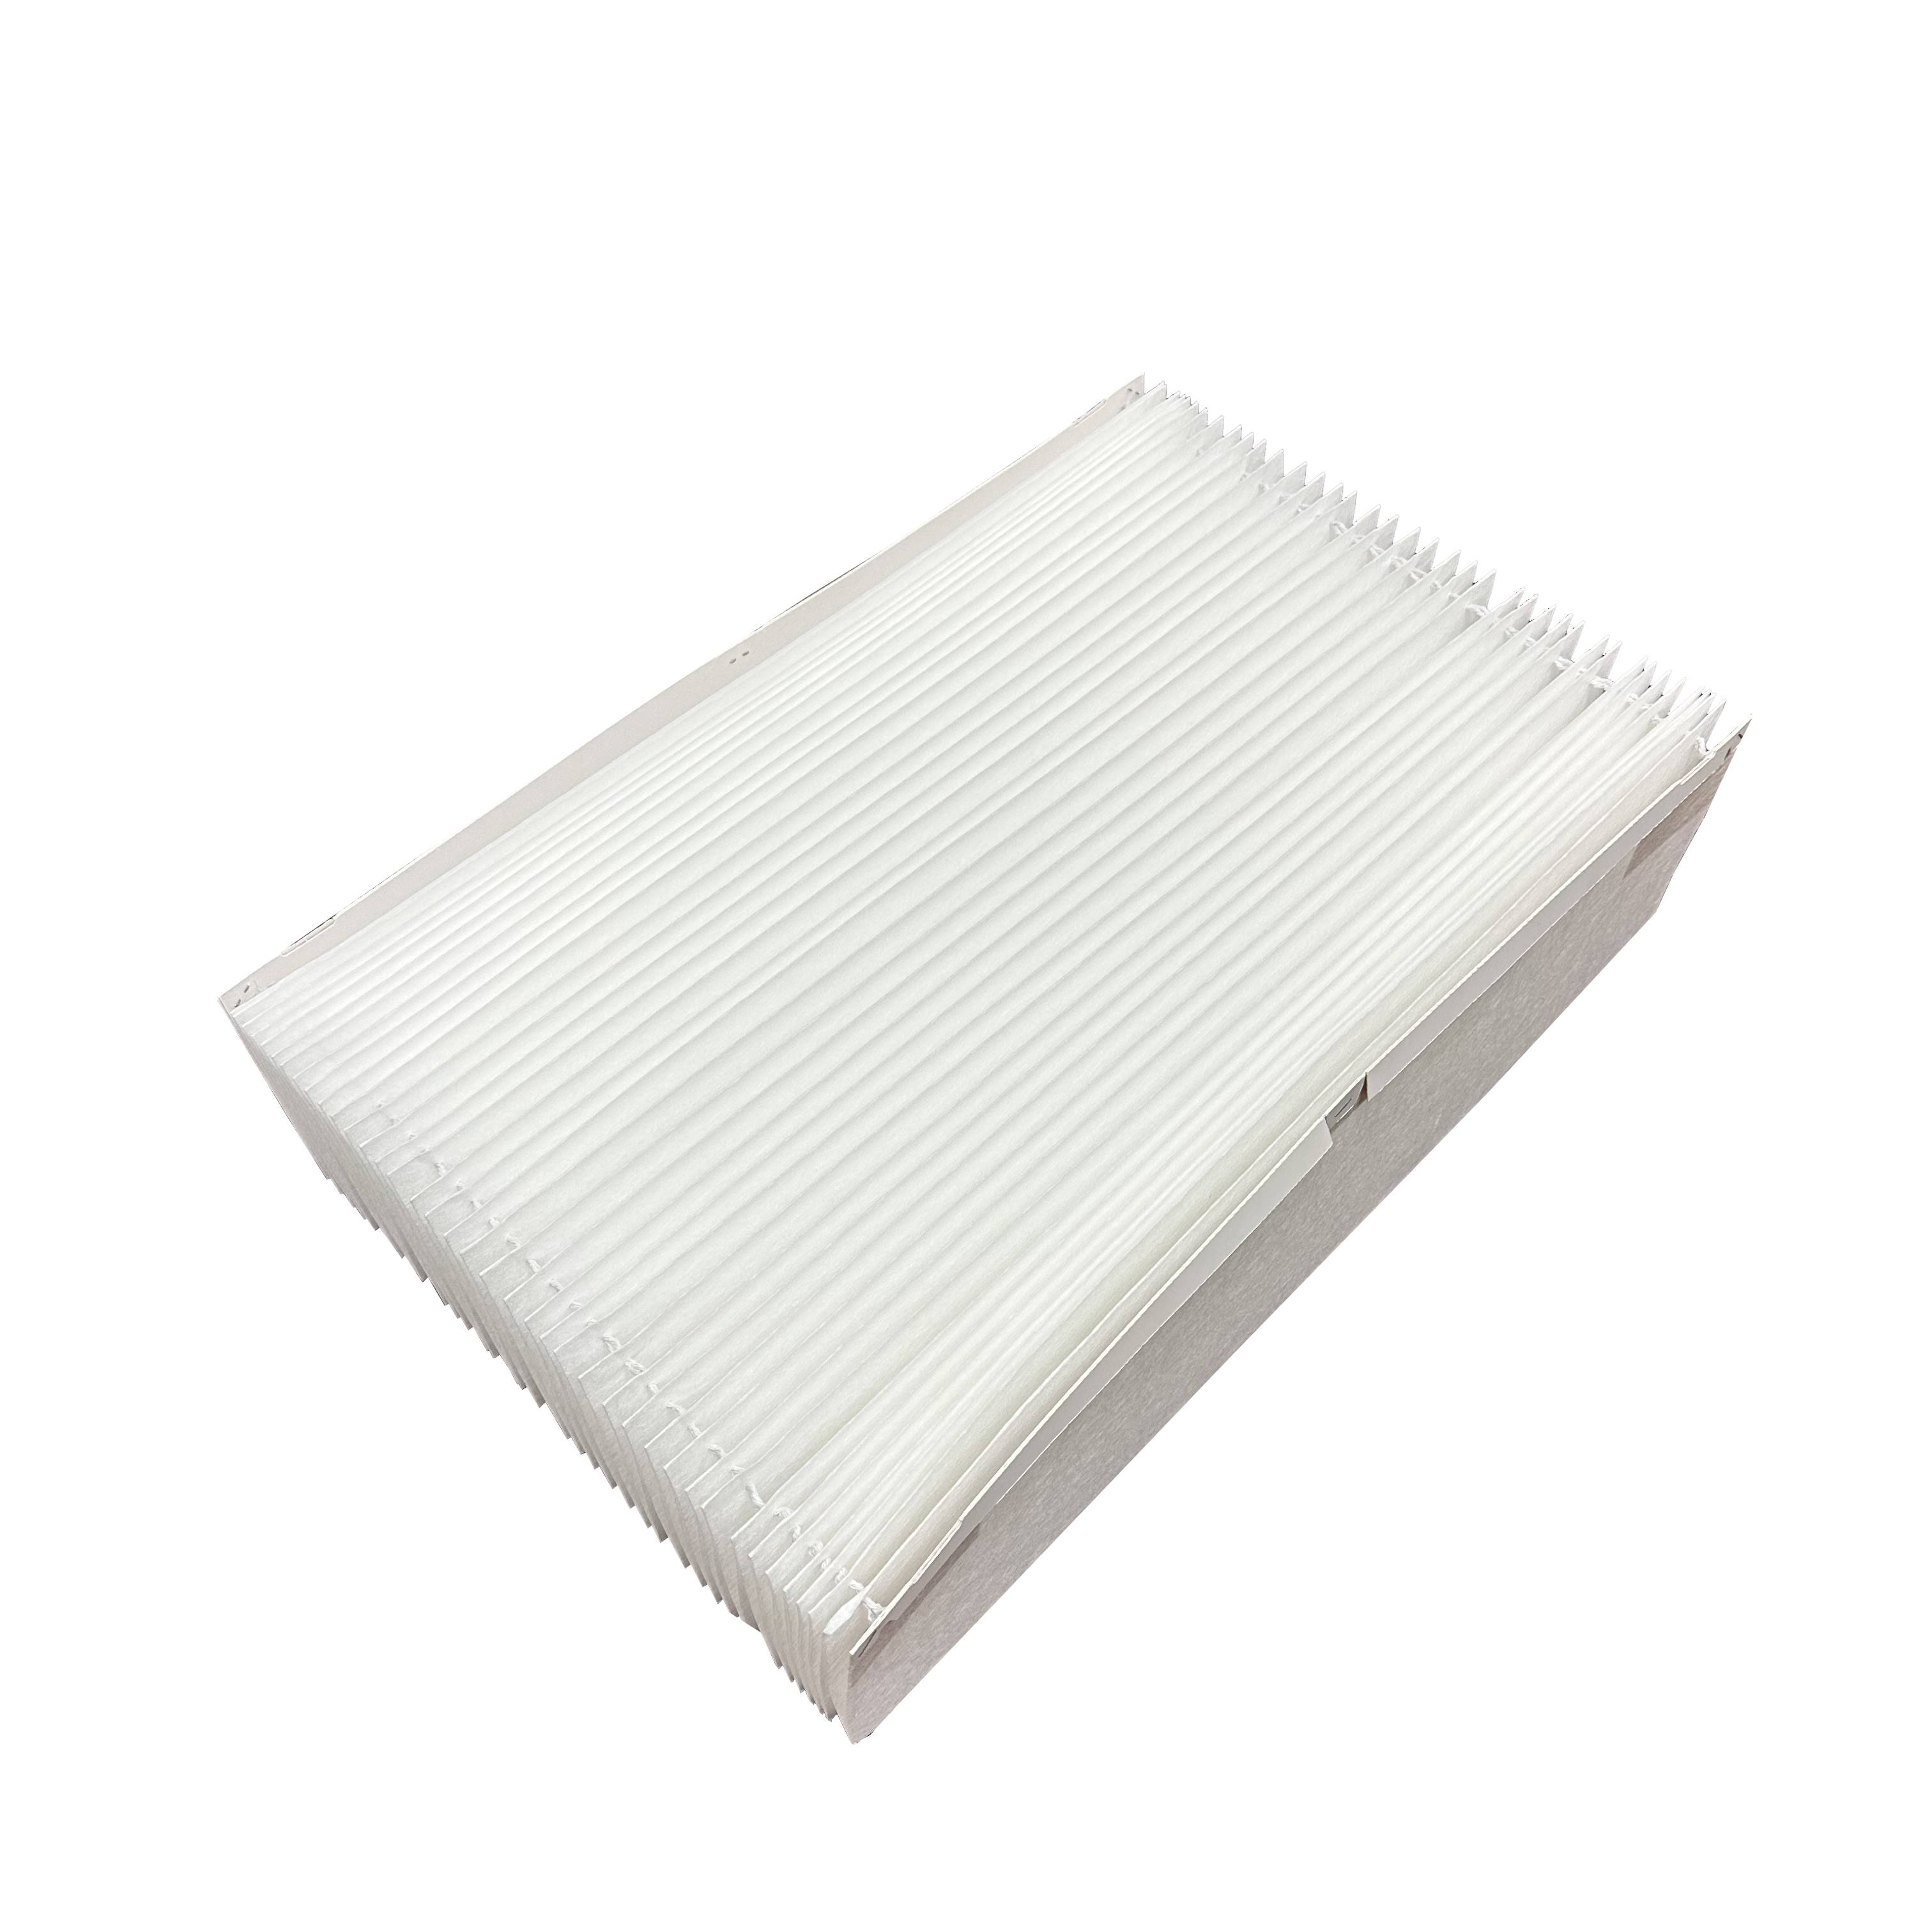 X5424 Filters Fast® Replacement for Lennox X5424 20x25x6 MERV 16 Furnace & AC Air Filter